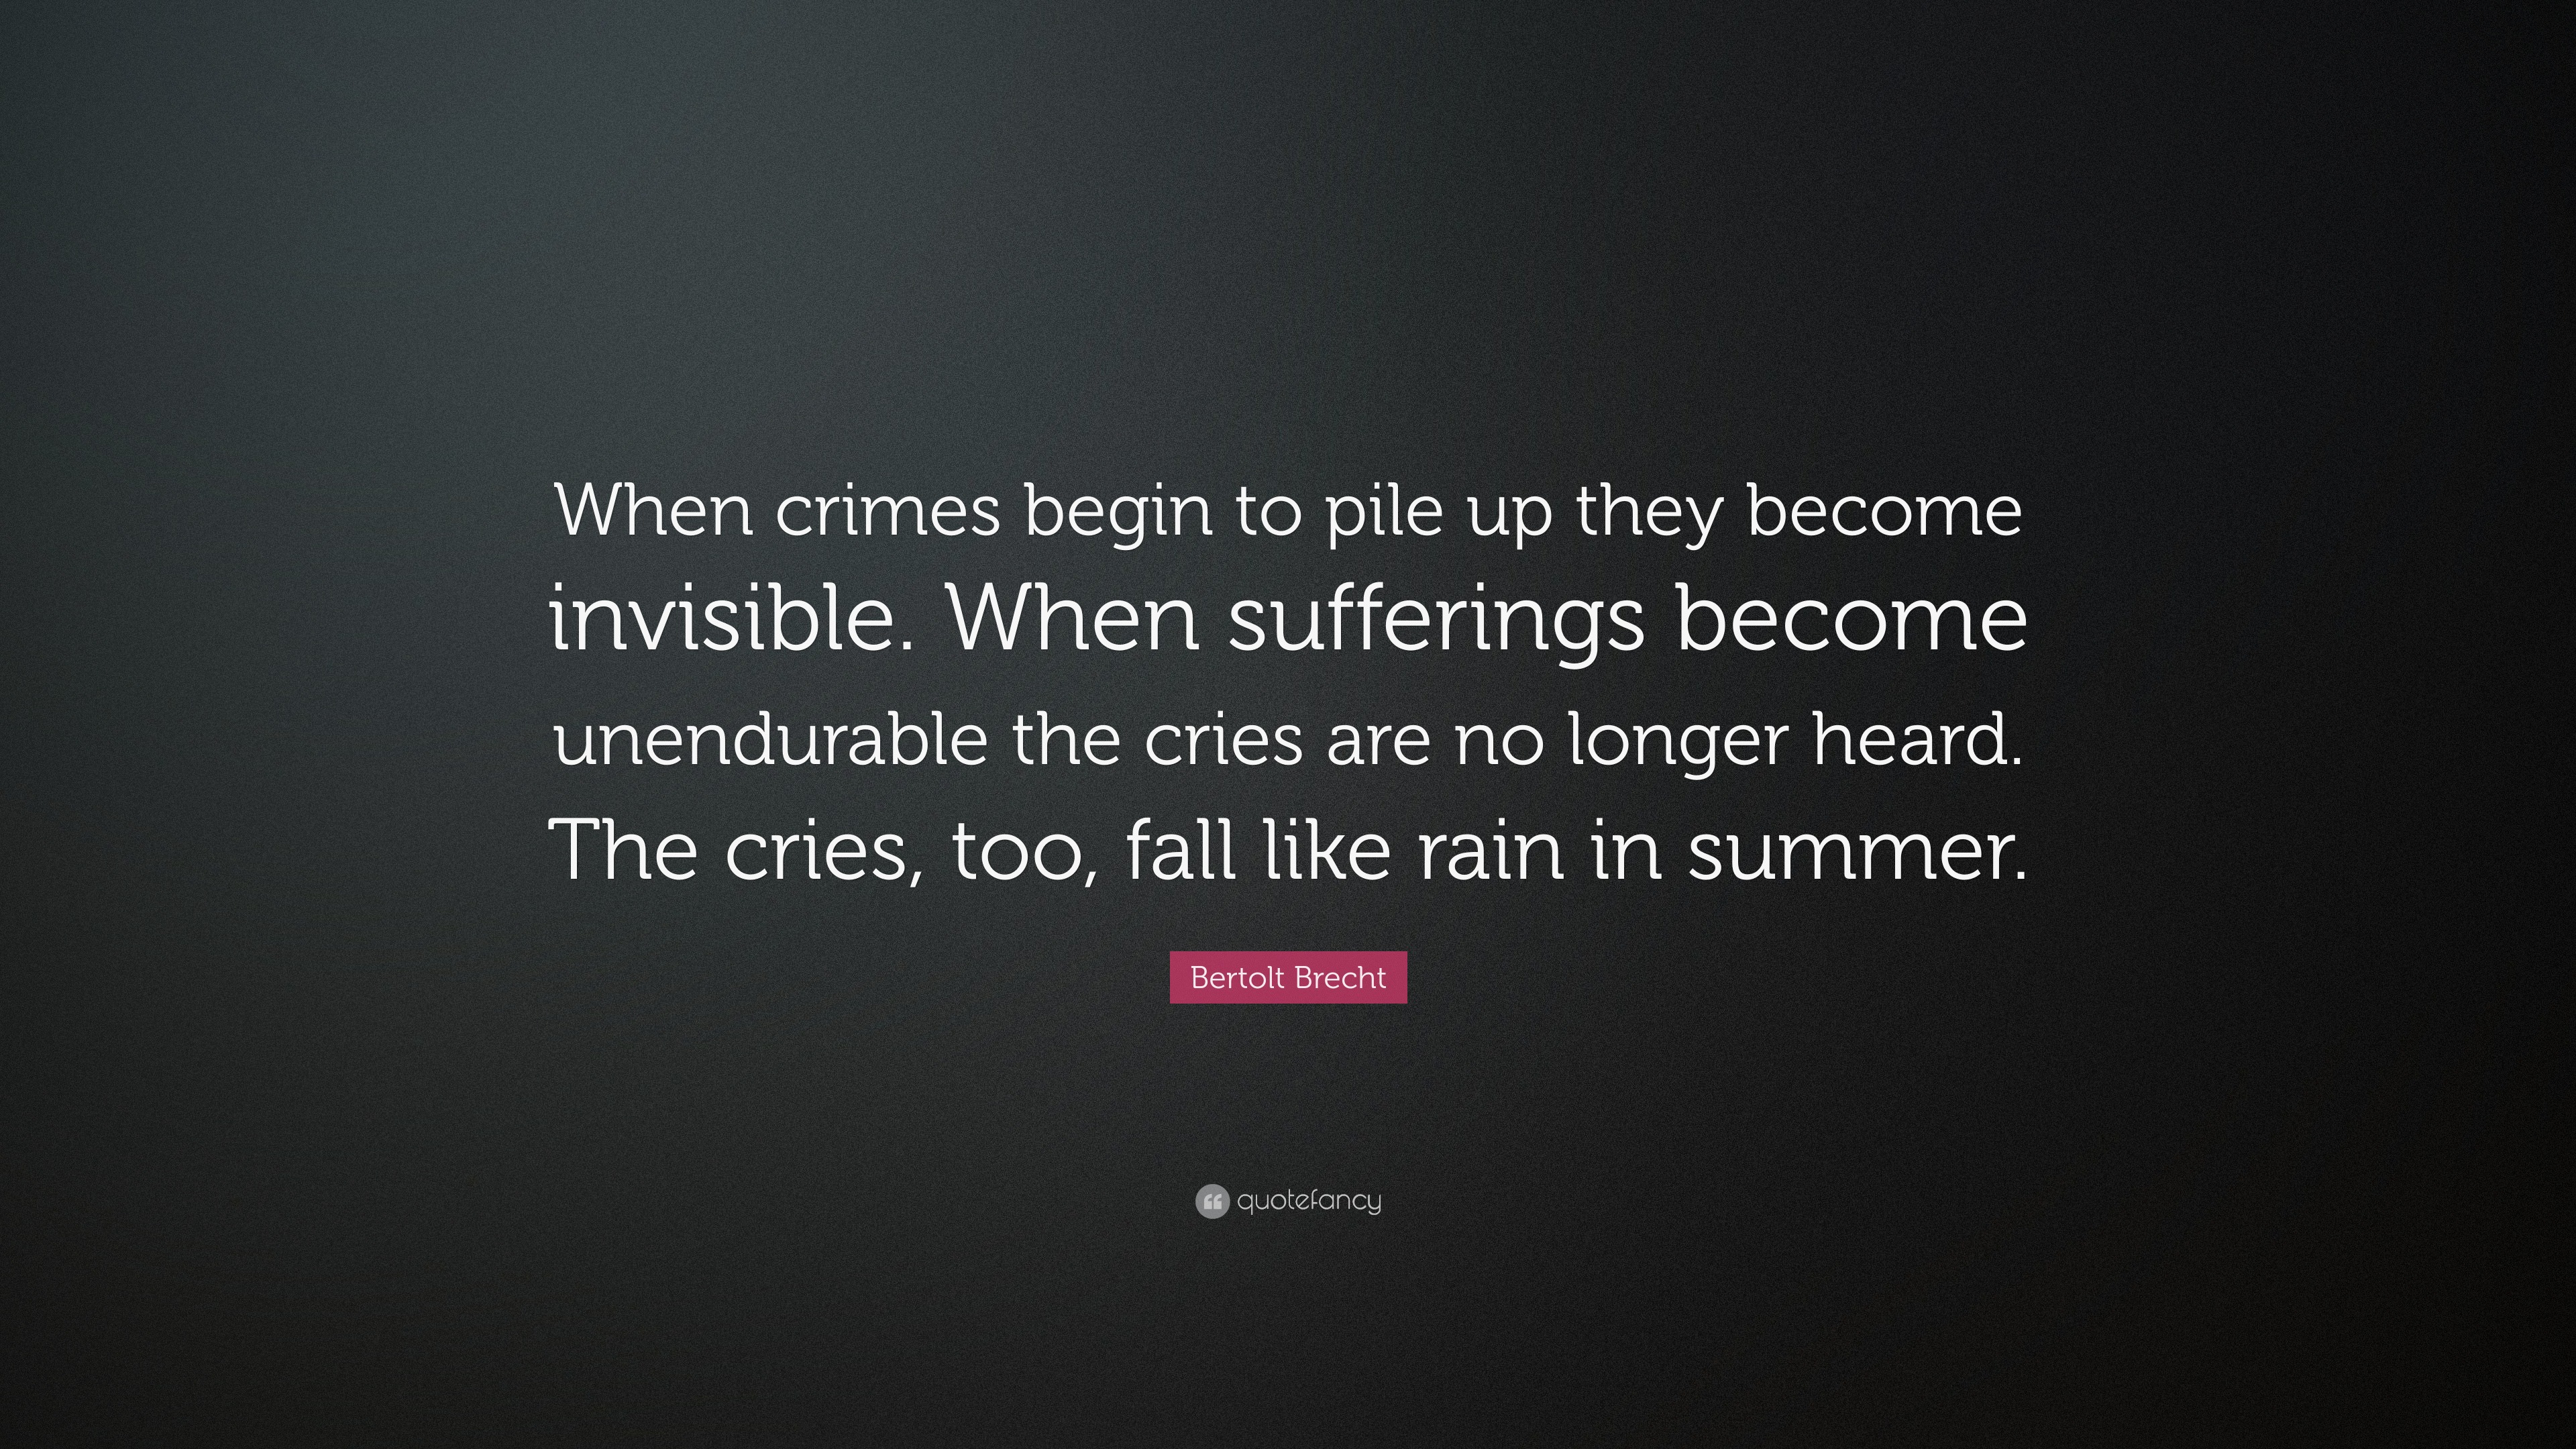 Bertolt Brecht Quote: “When crimes begin to pile up they become ...